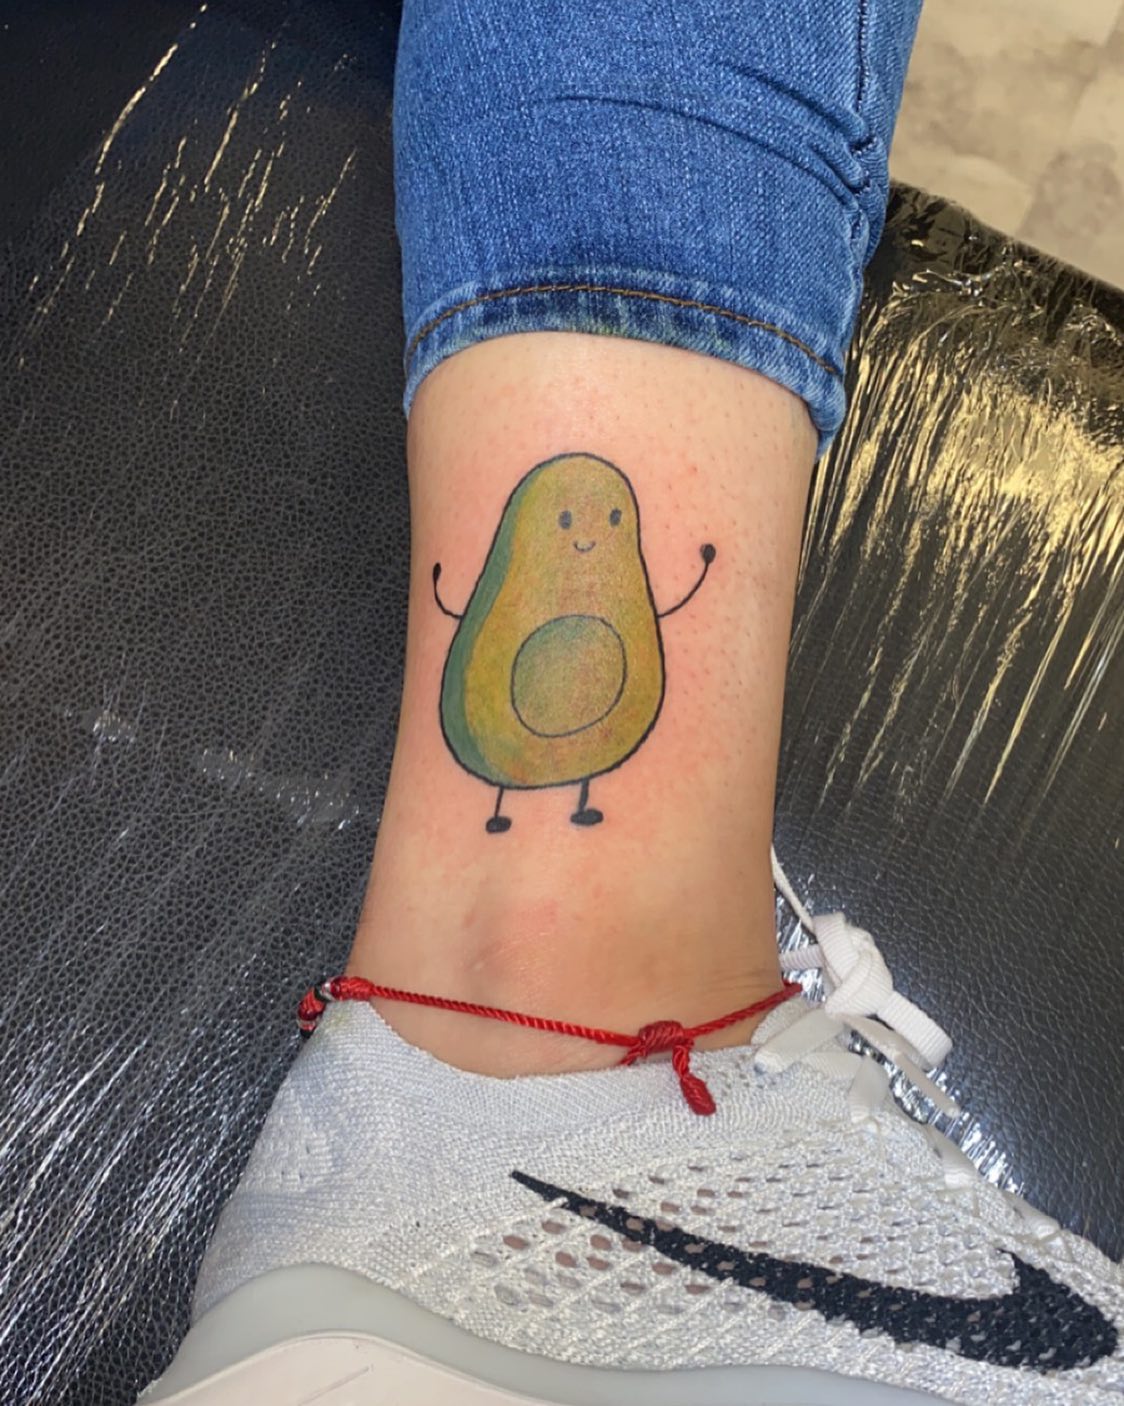 Your next ankle tattoo can be fun and funky! Why stay so serious?! This avocado design will show that you’re a quirky person and someone who likes to laugh and goof around at all times.